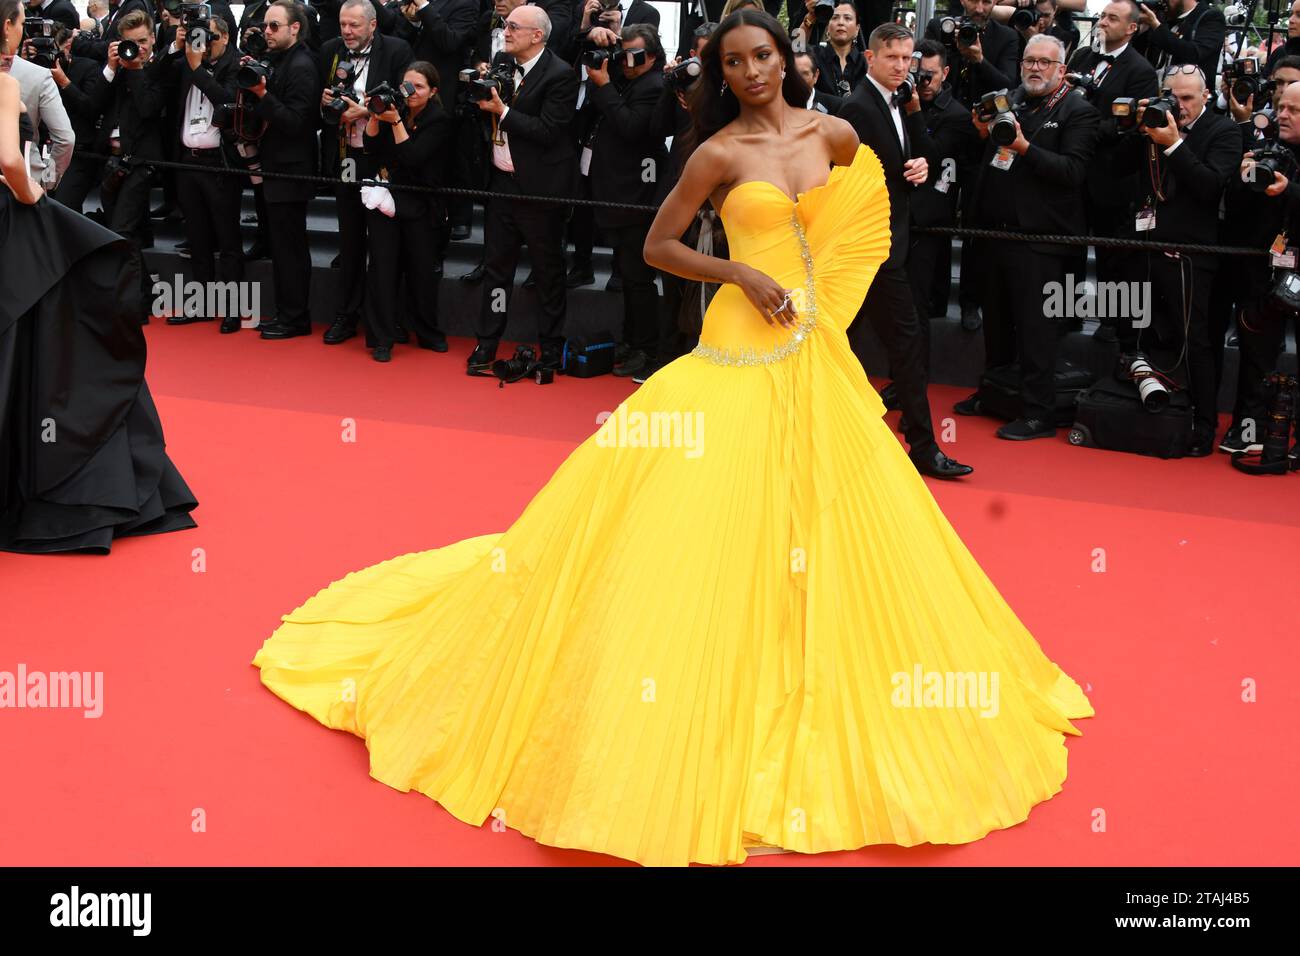 CANNES, FRANCE - MAY 18: Jasmine Tookes attends the screening of 'Top Gun: Maverick' during the 75th annual Cannes film festival at Palais des Festiva Stock Photo